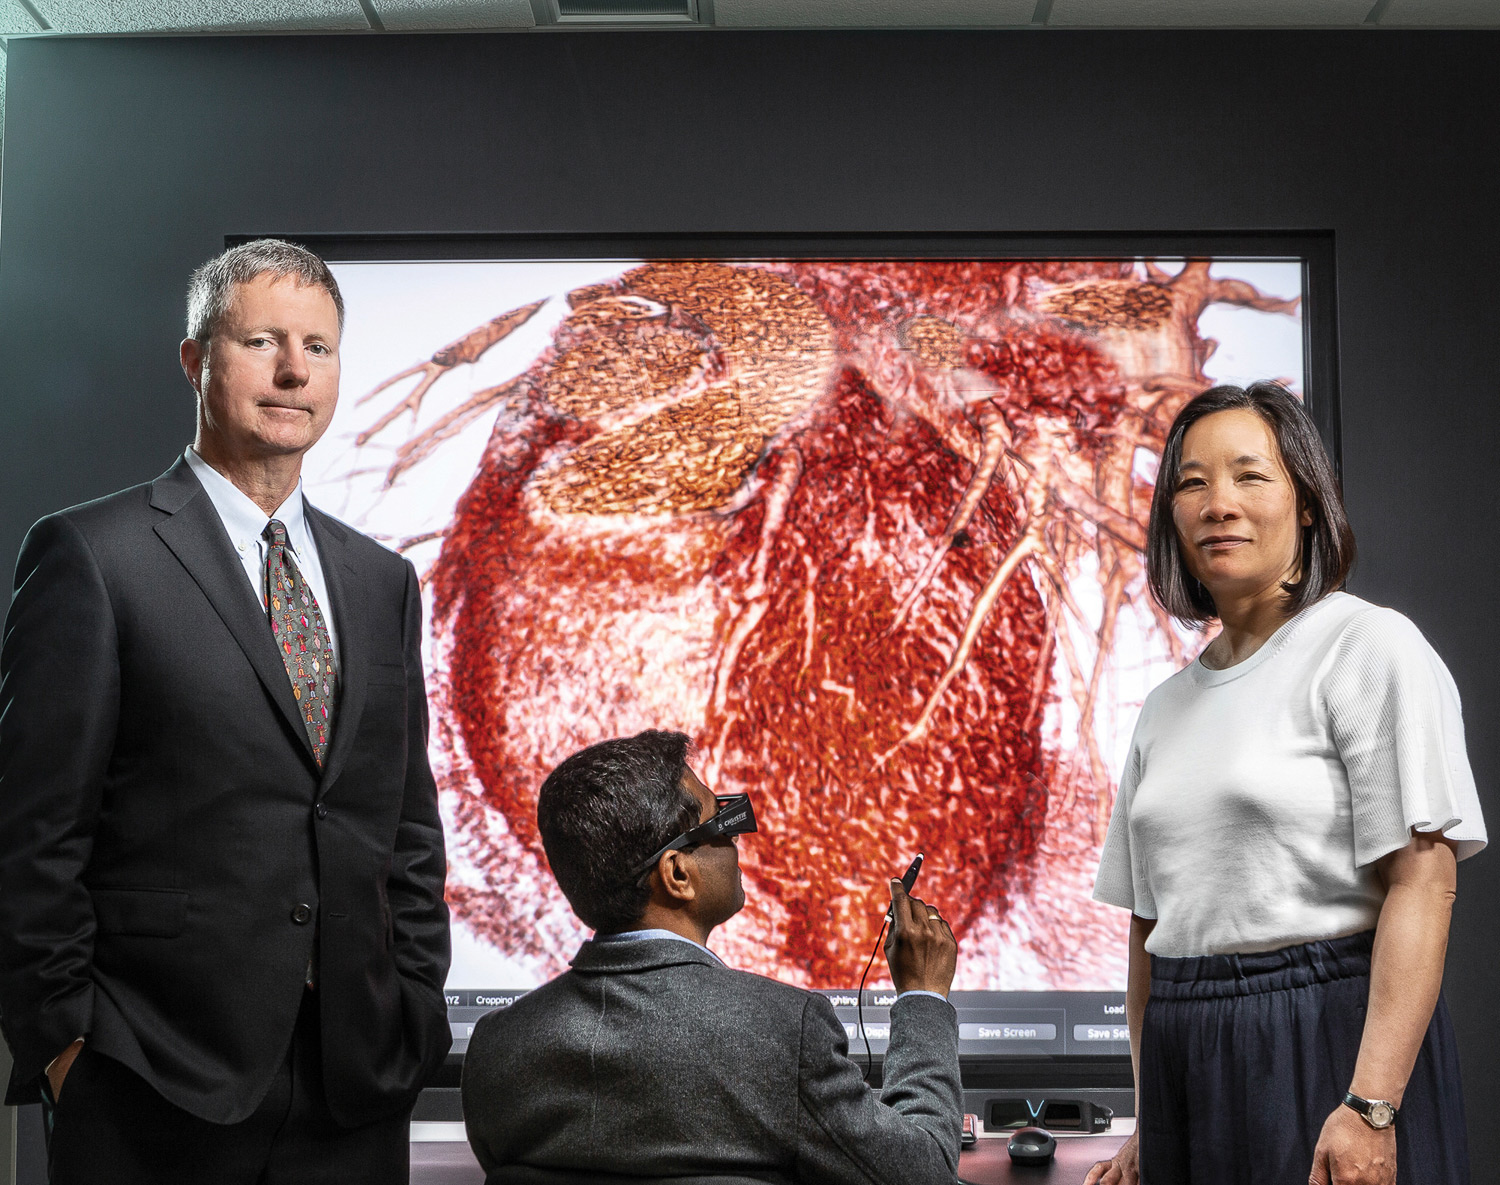 3-D imaging at the heart of precision health